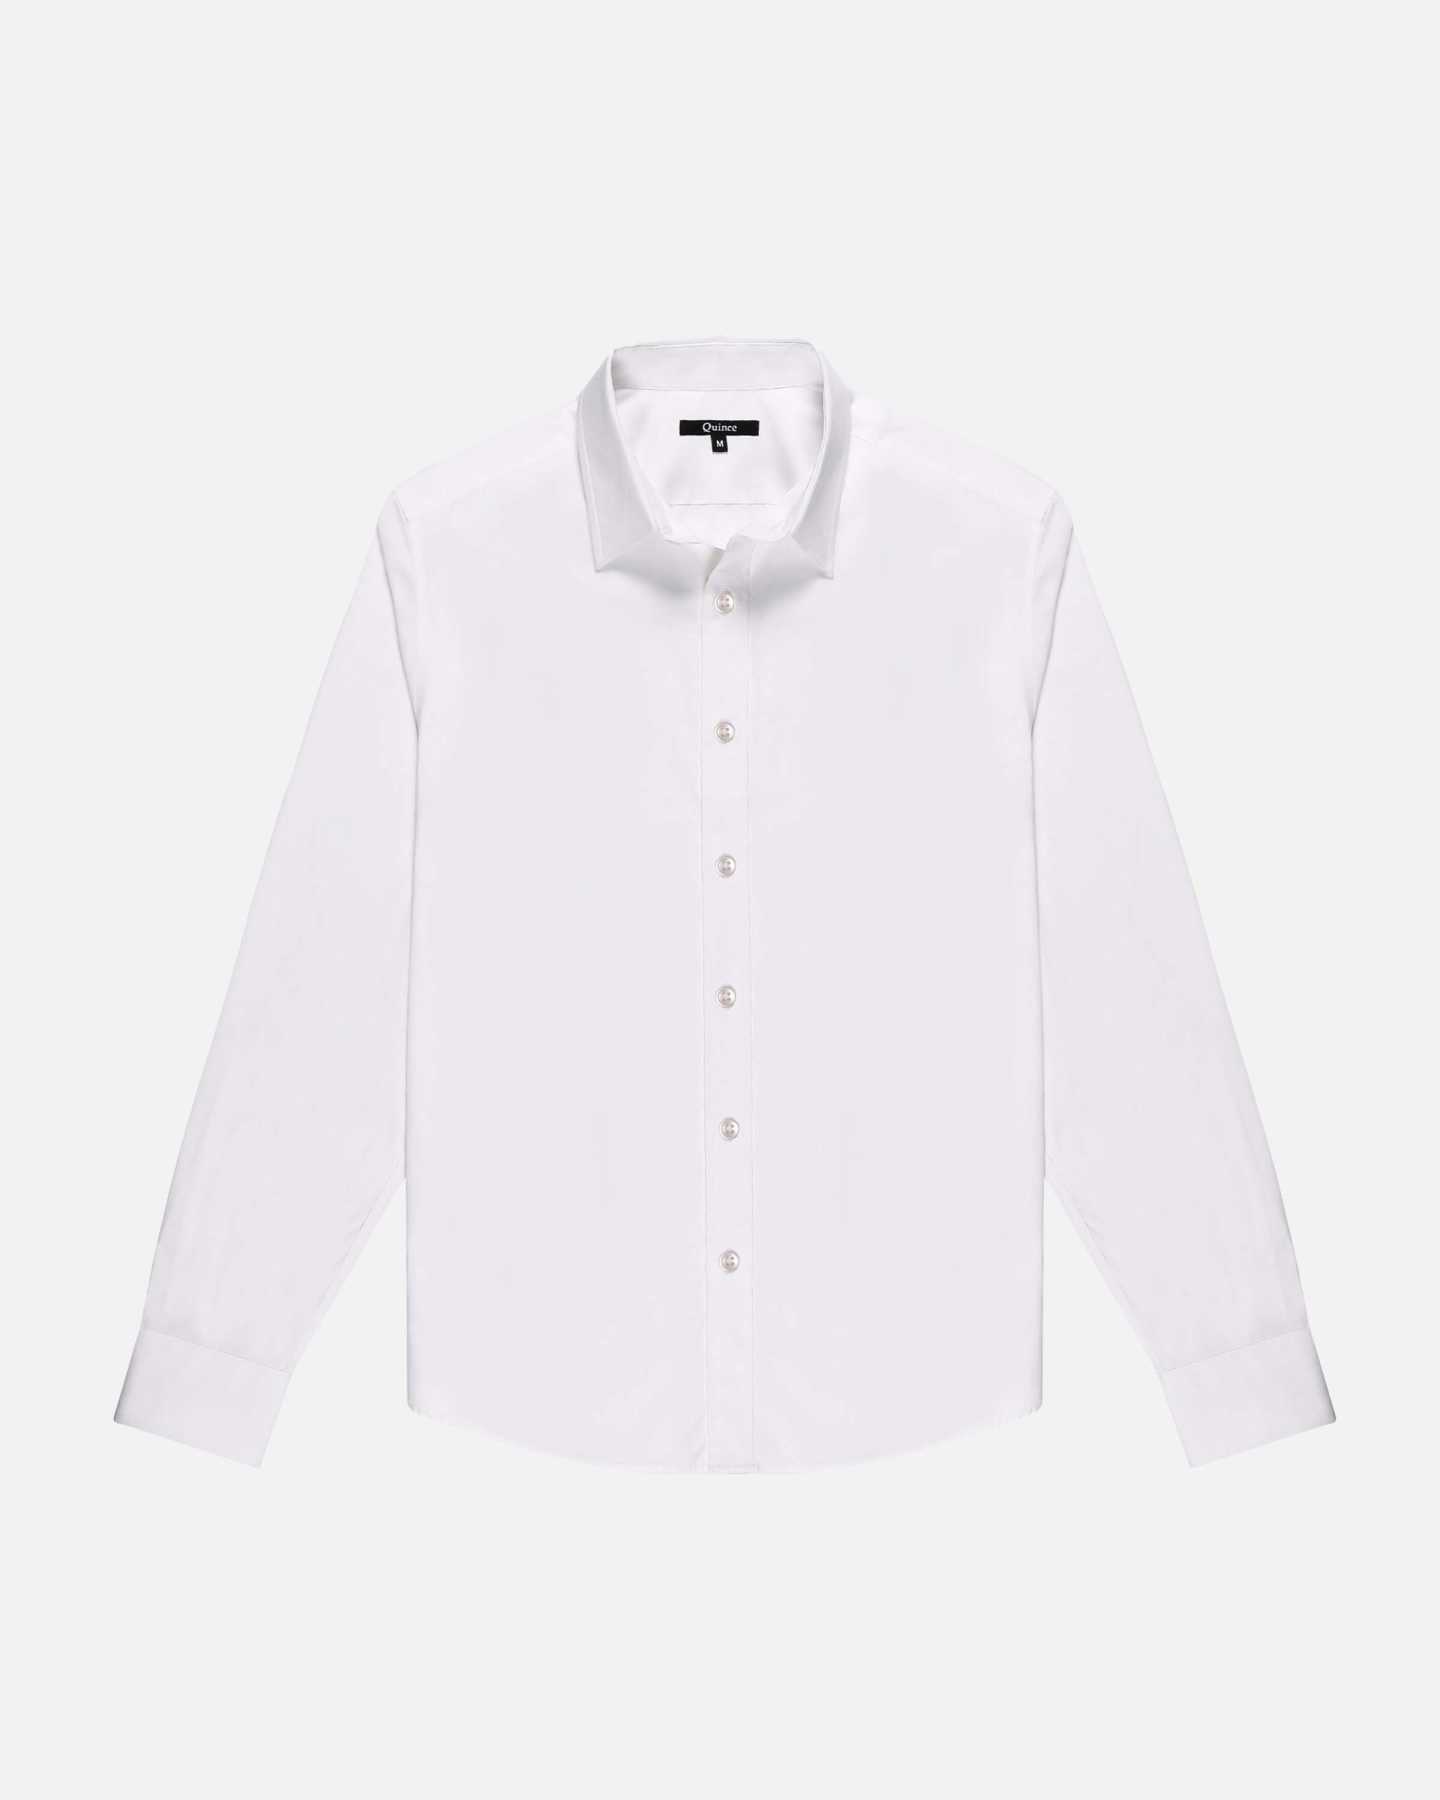 The Untucked Dress Shirt - Solid White - 6 - Thumbnail